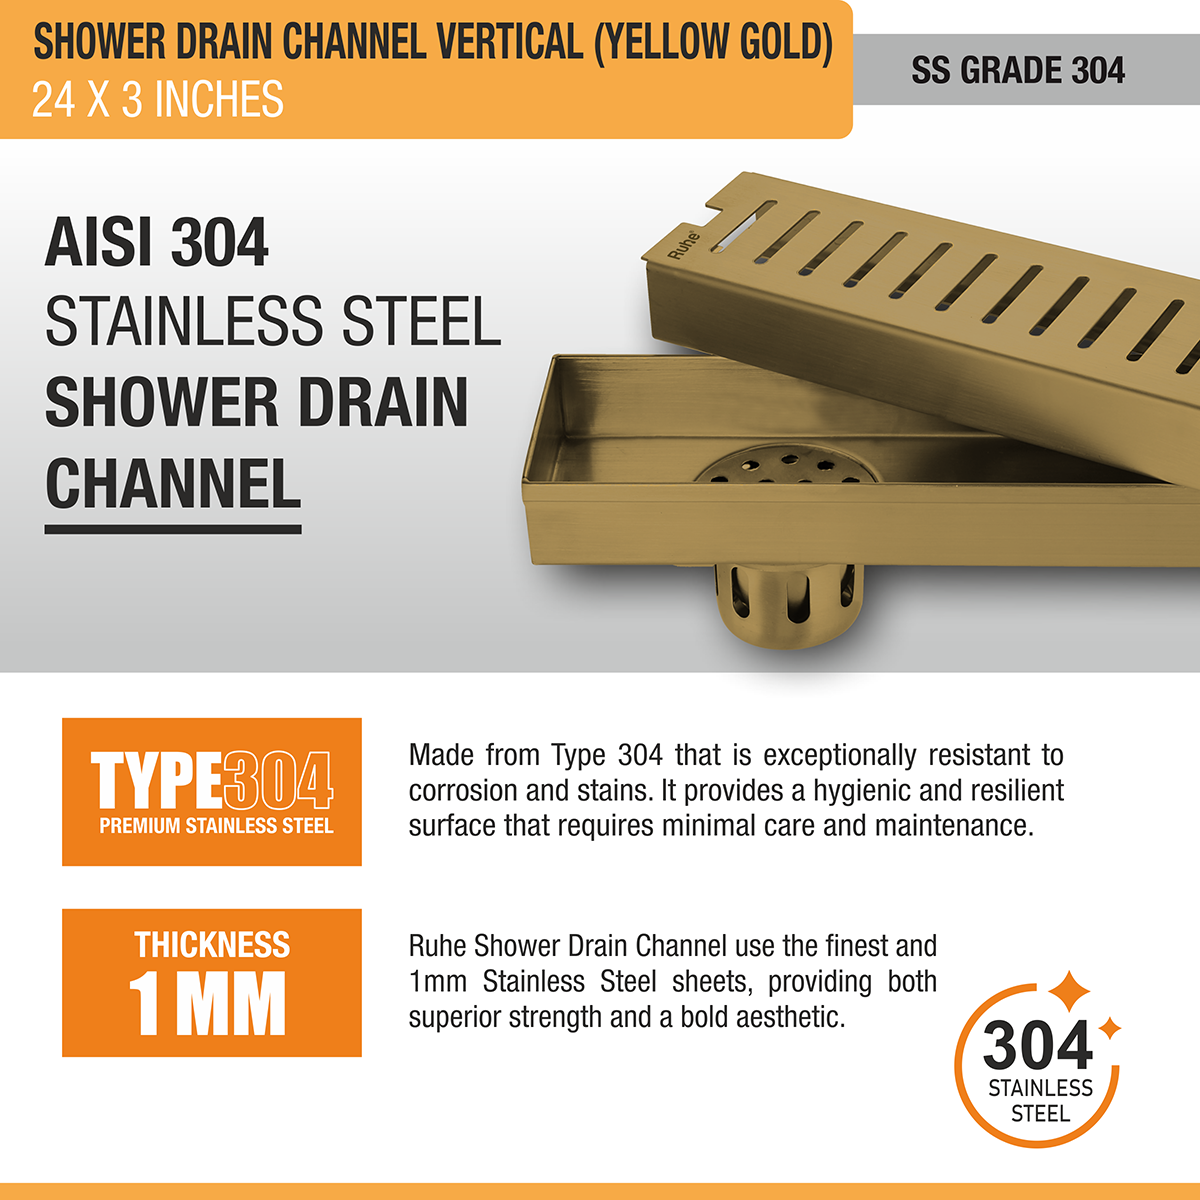 Vertical Shower Drain Channel (24 x 3 Inches) YELLOW GOLD stainless steel